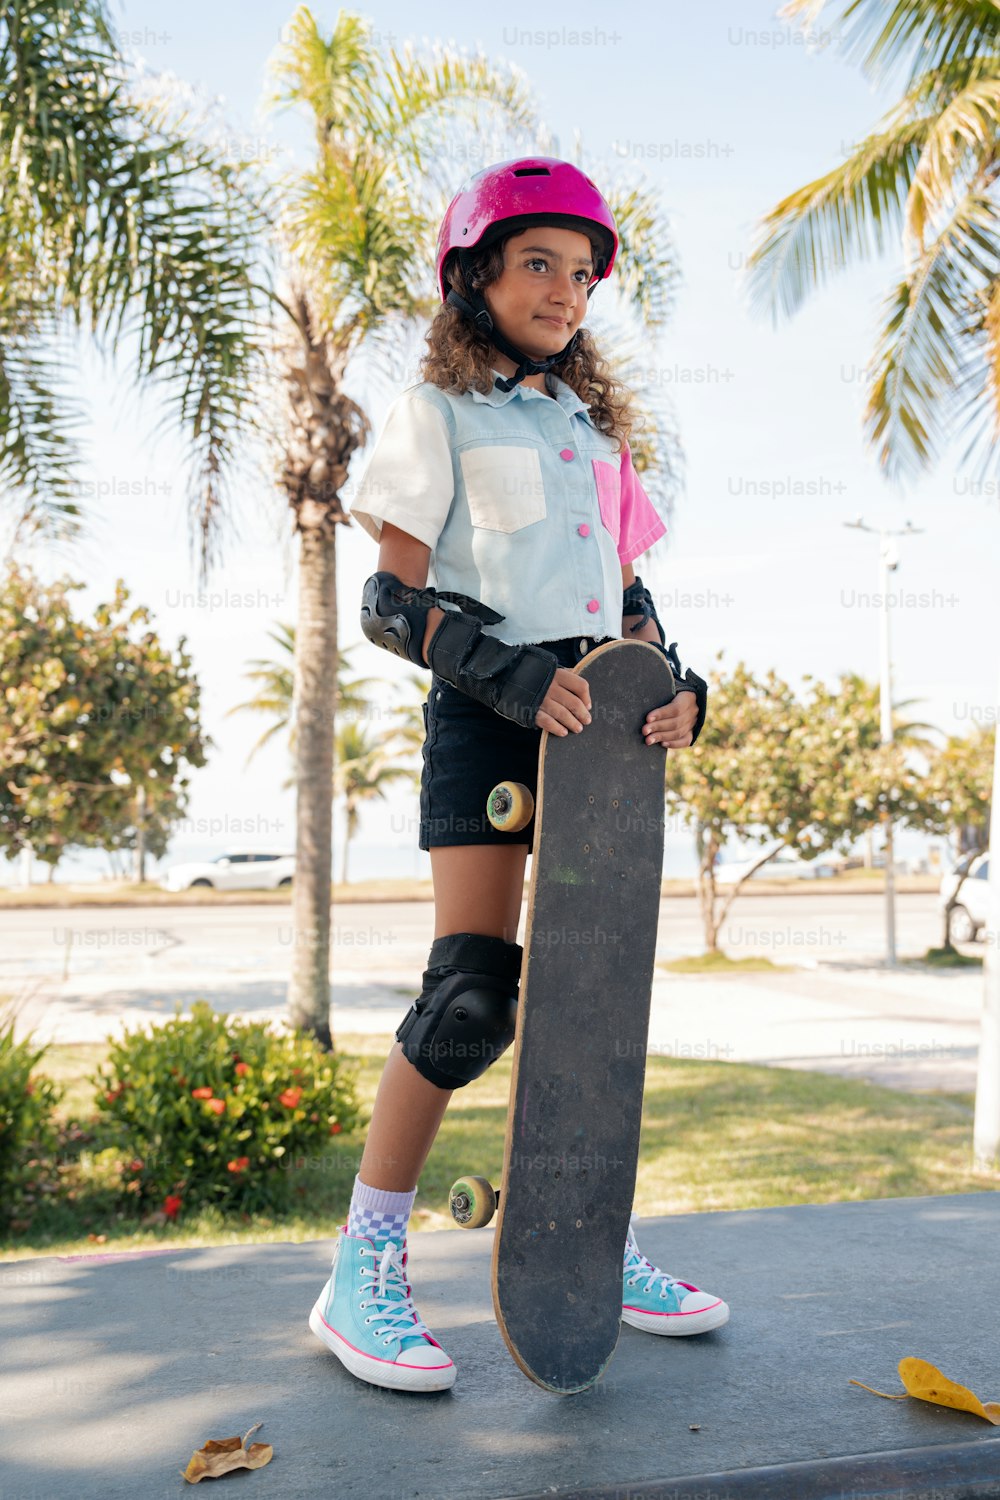 a young girl holding a skateboard on a sidewalk